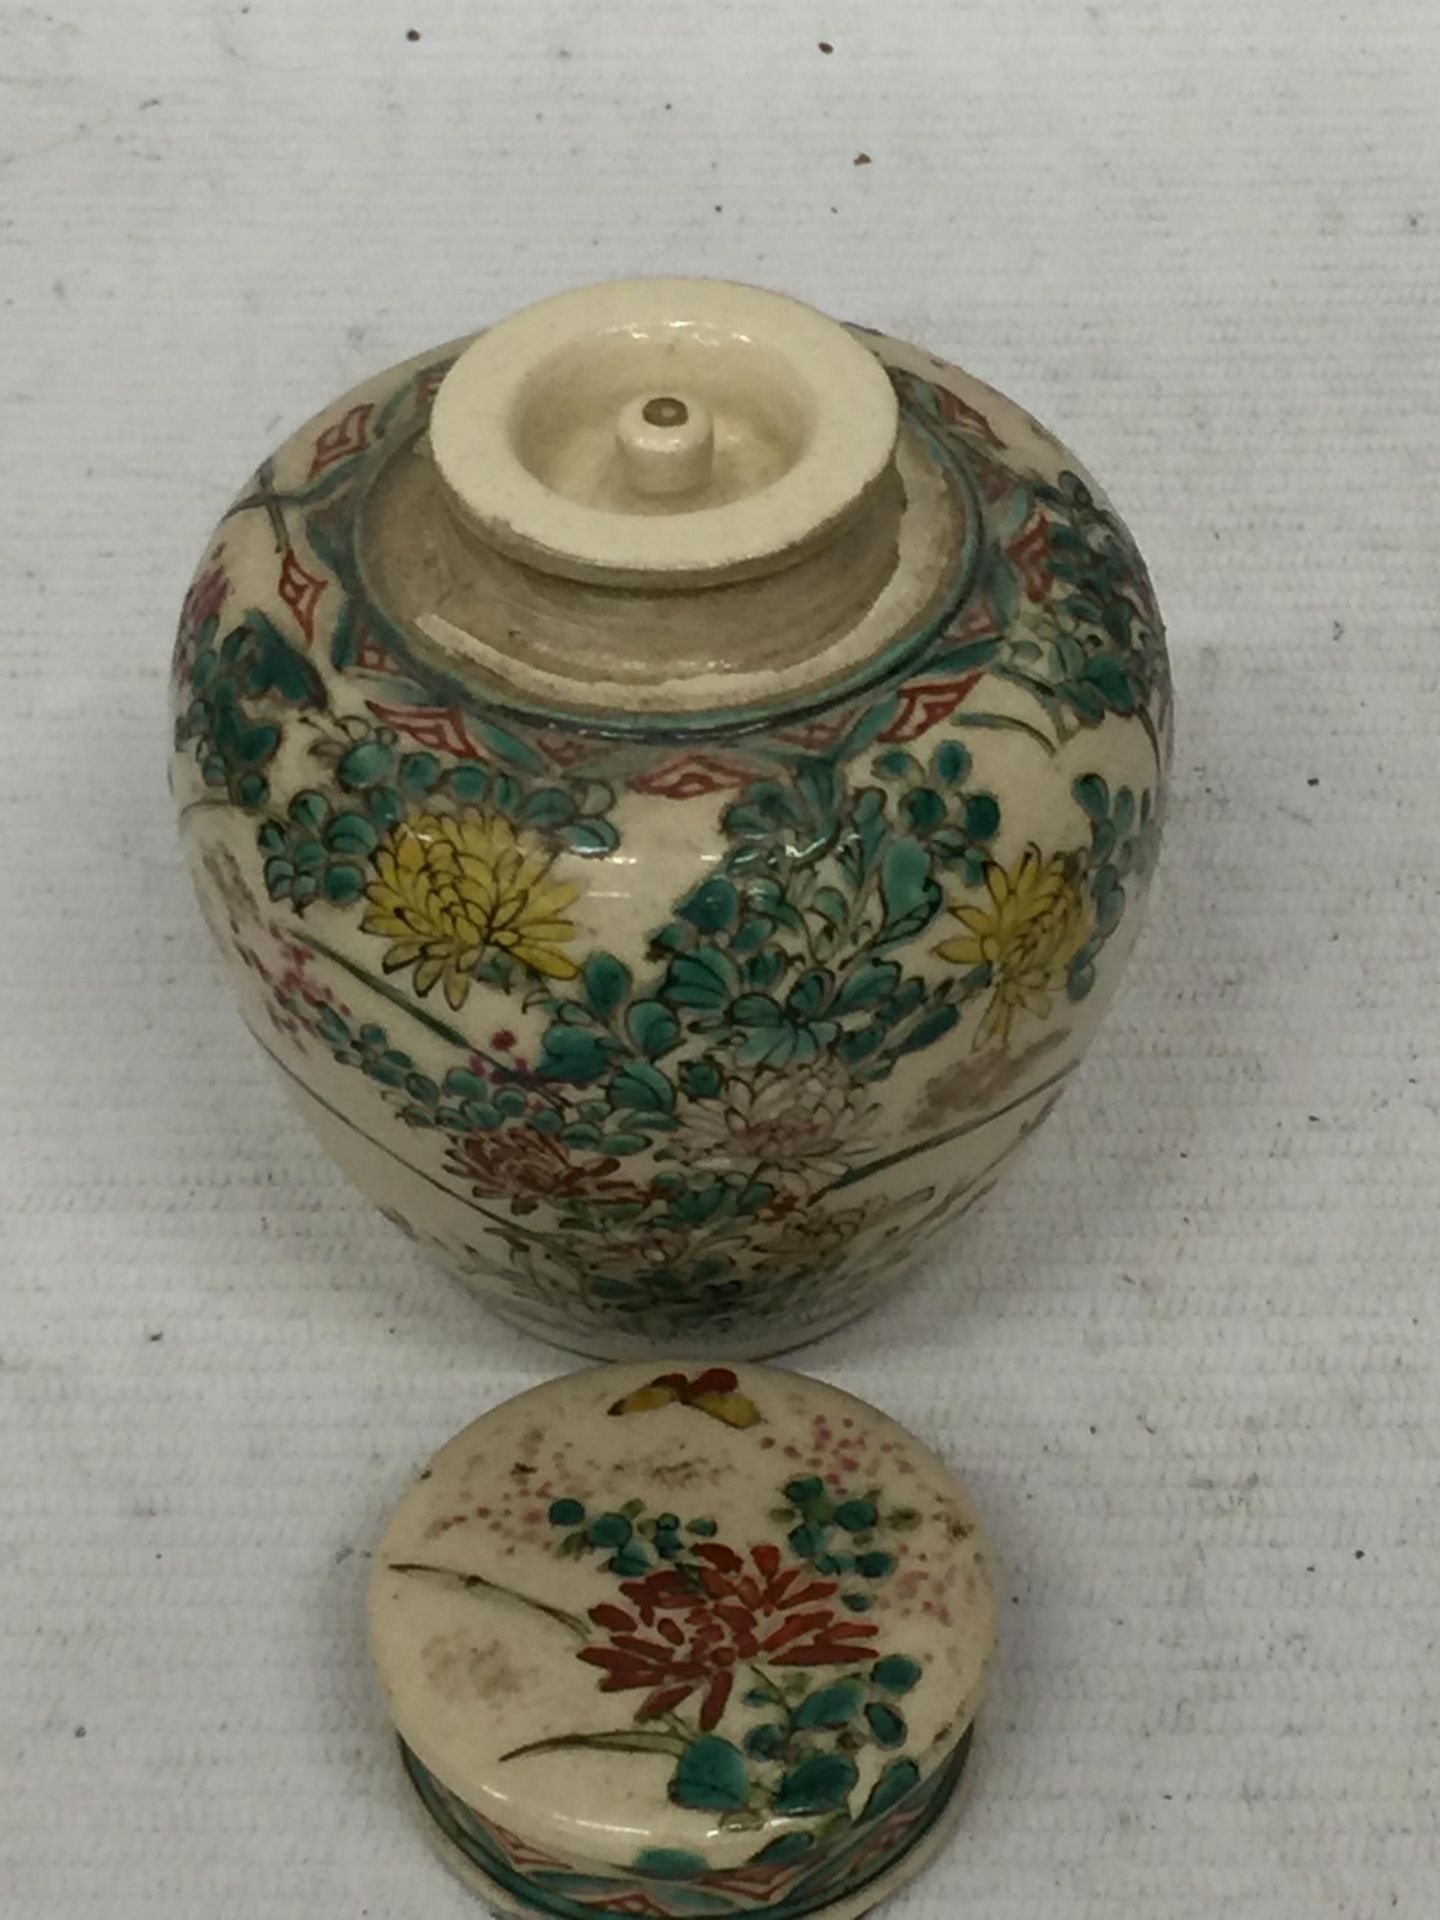 A JAPANESE STONEWARE LIDDED SMALL POT POURRI / GINGER JAR WITH BIRD AND FLORAL DESIGN AND INNDER LID - Image 5 of 7